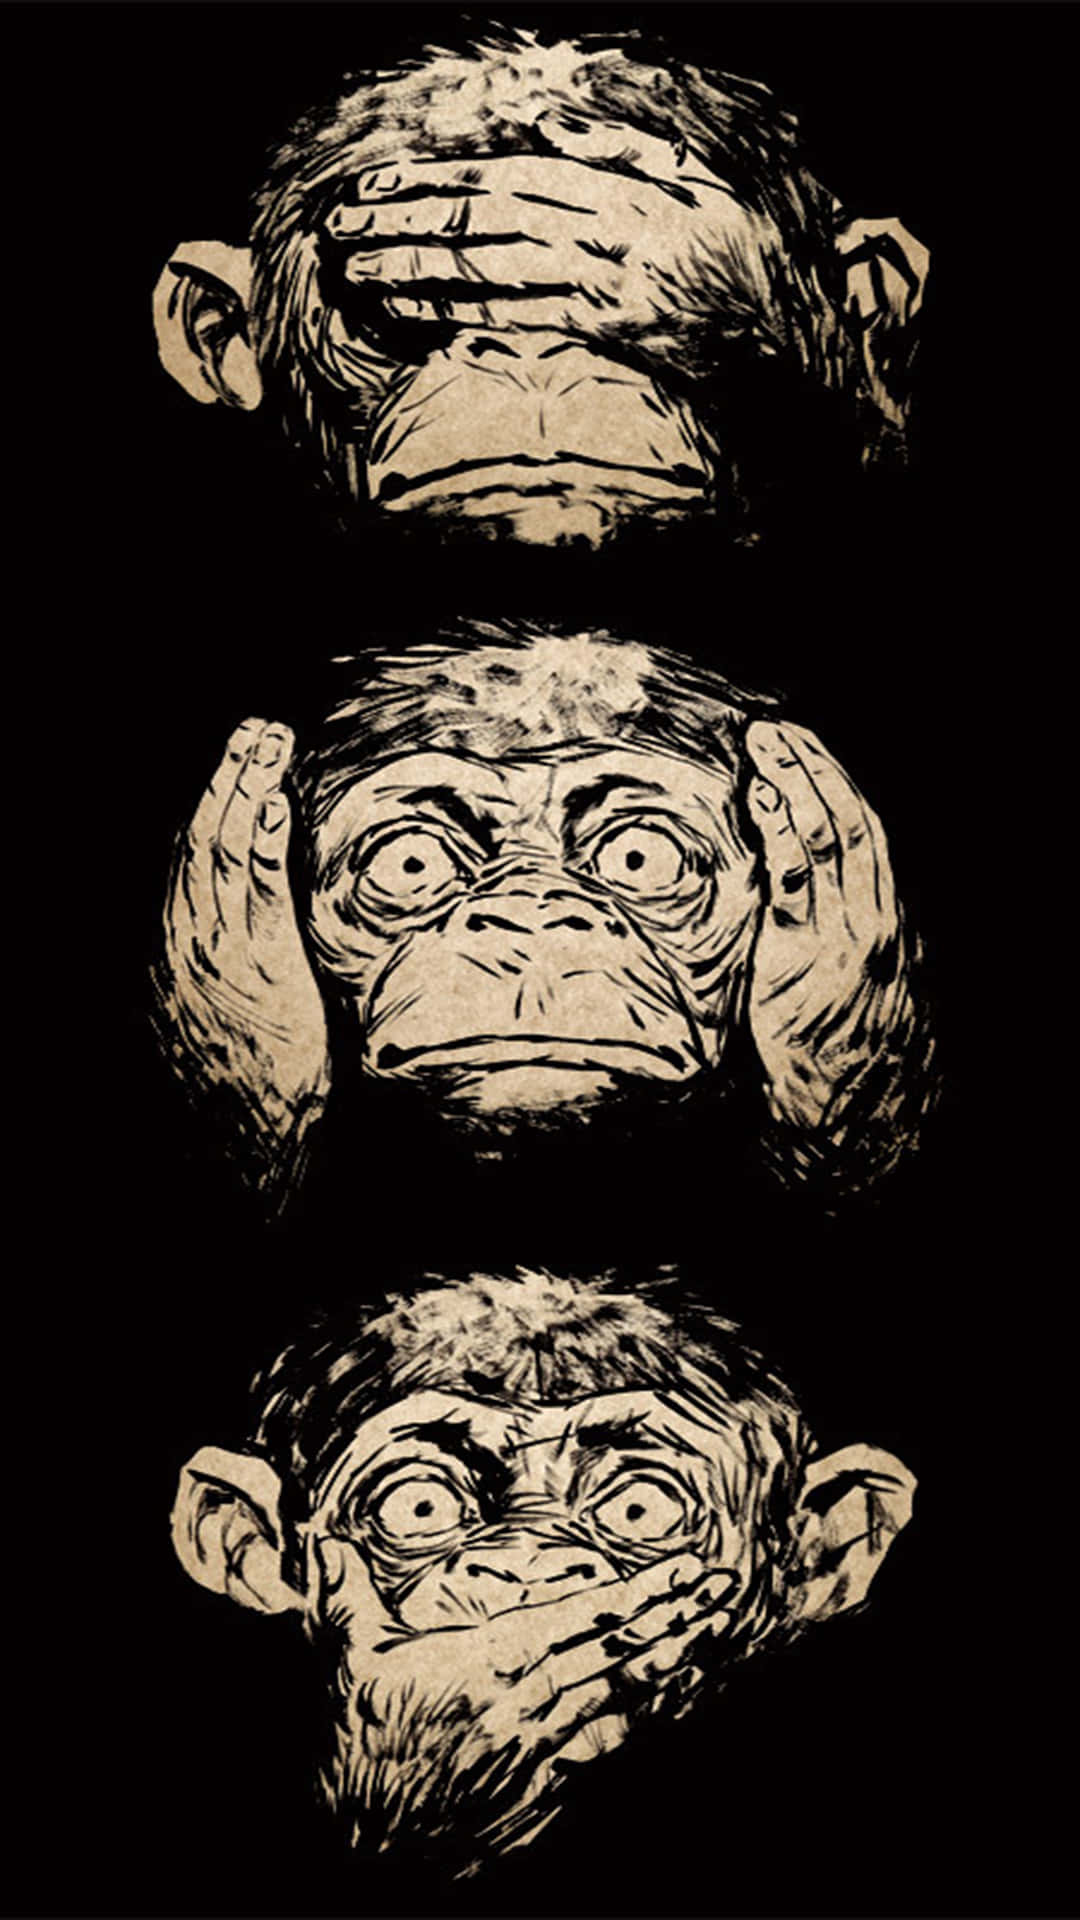 Monkey with an iPhone Wallpaper